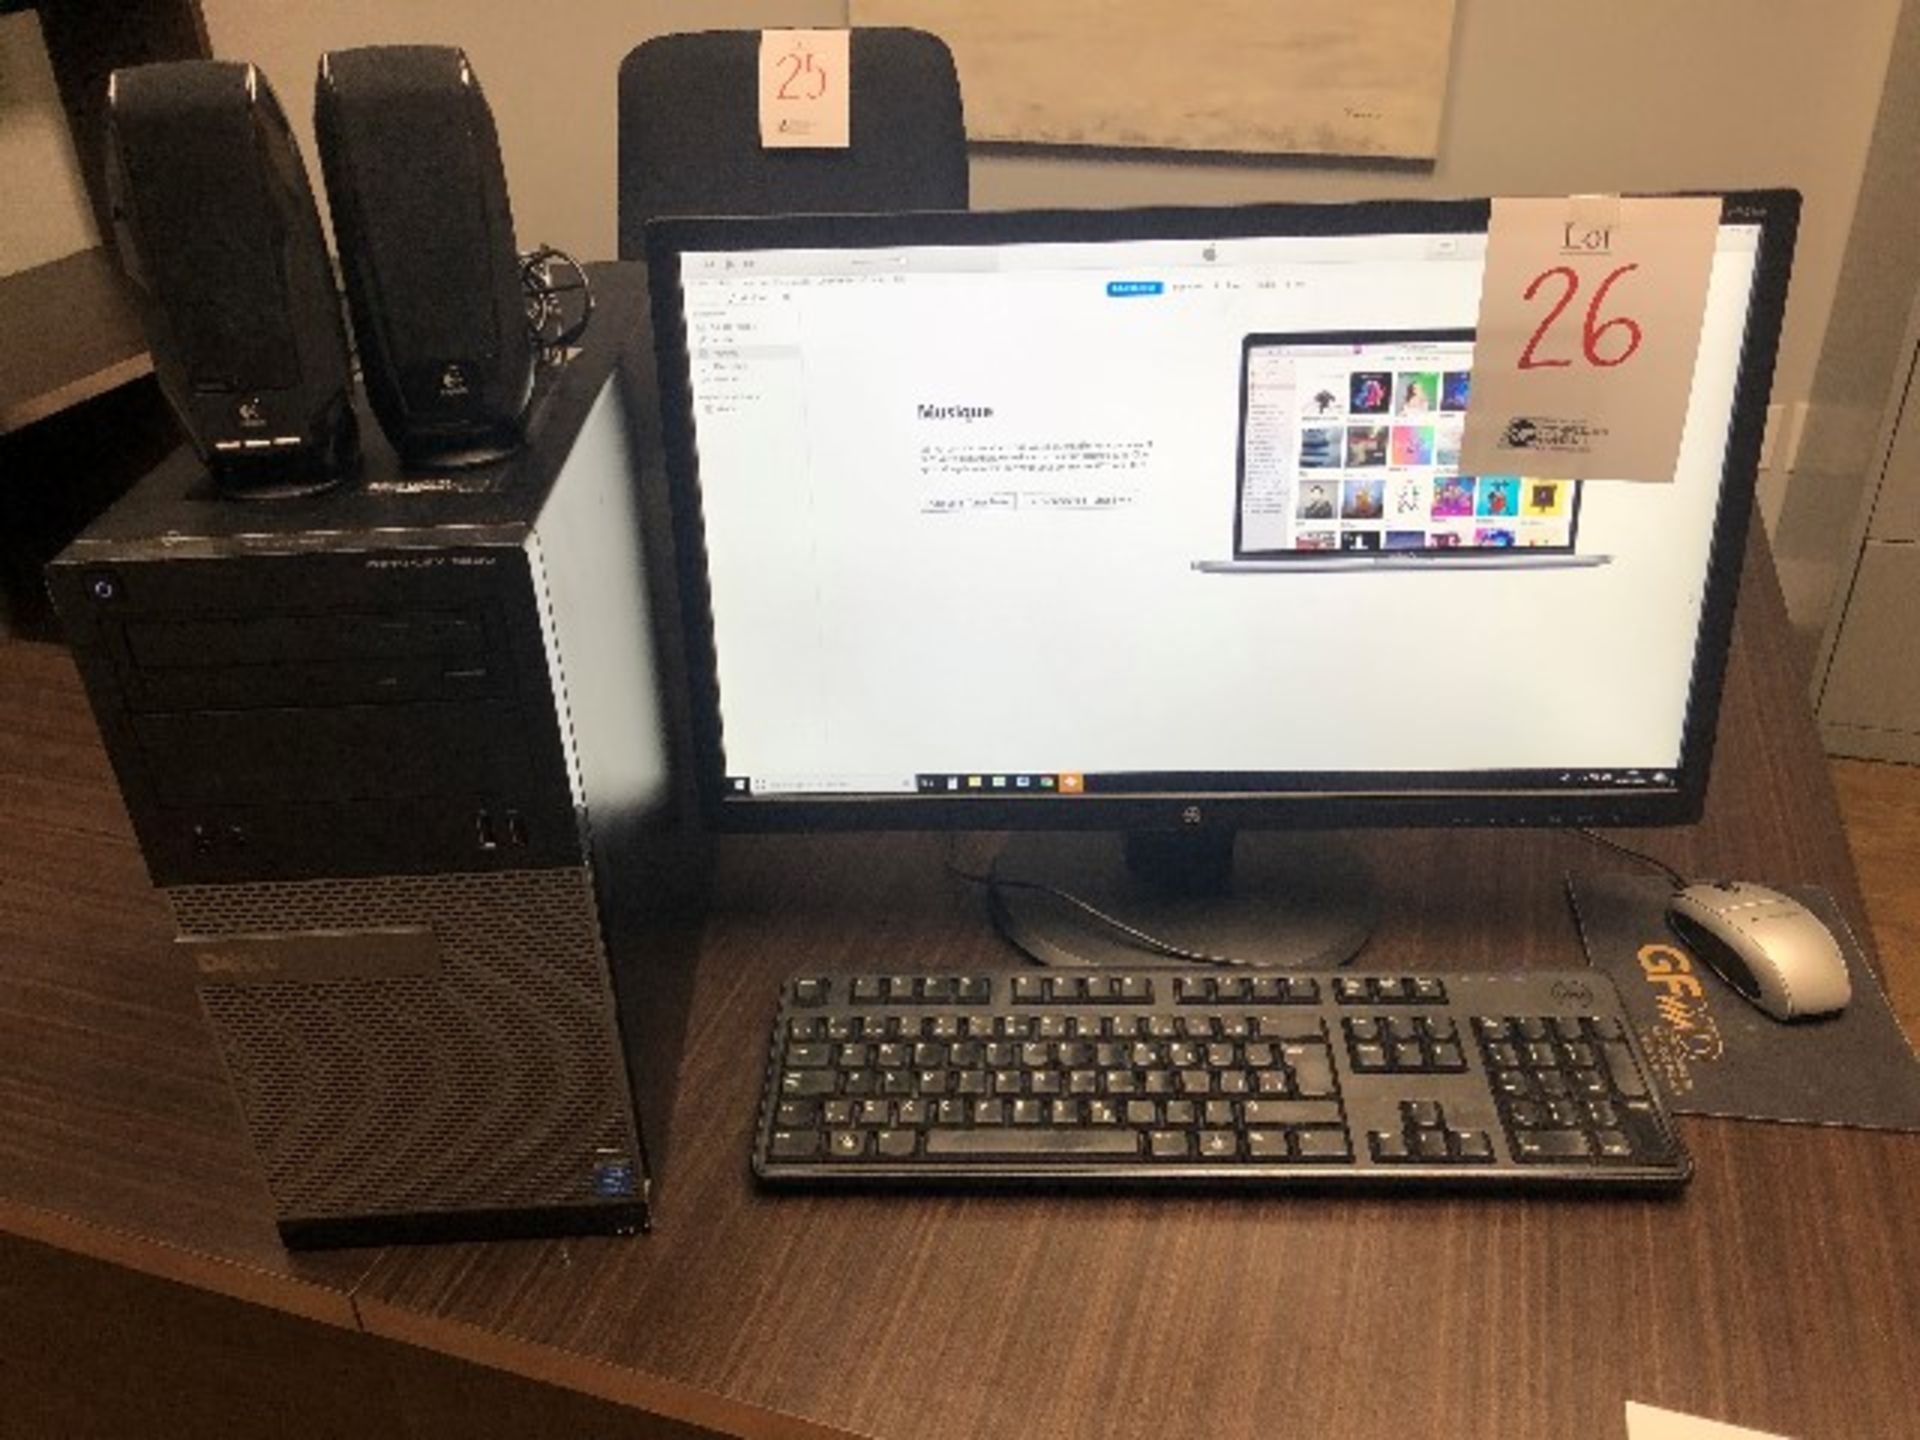 Dell i5,3.2GHz,8GB RAM,500GB HDD,monitor,keyboard,mouse,speakers